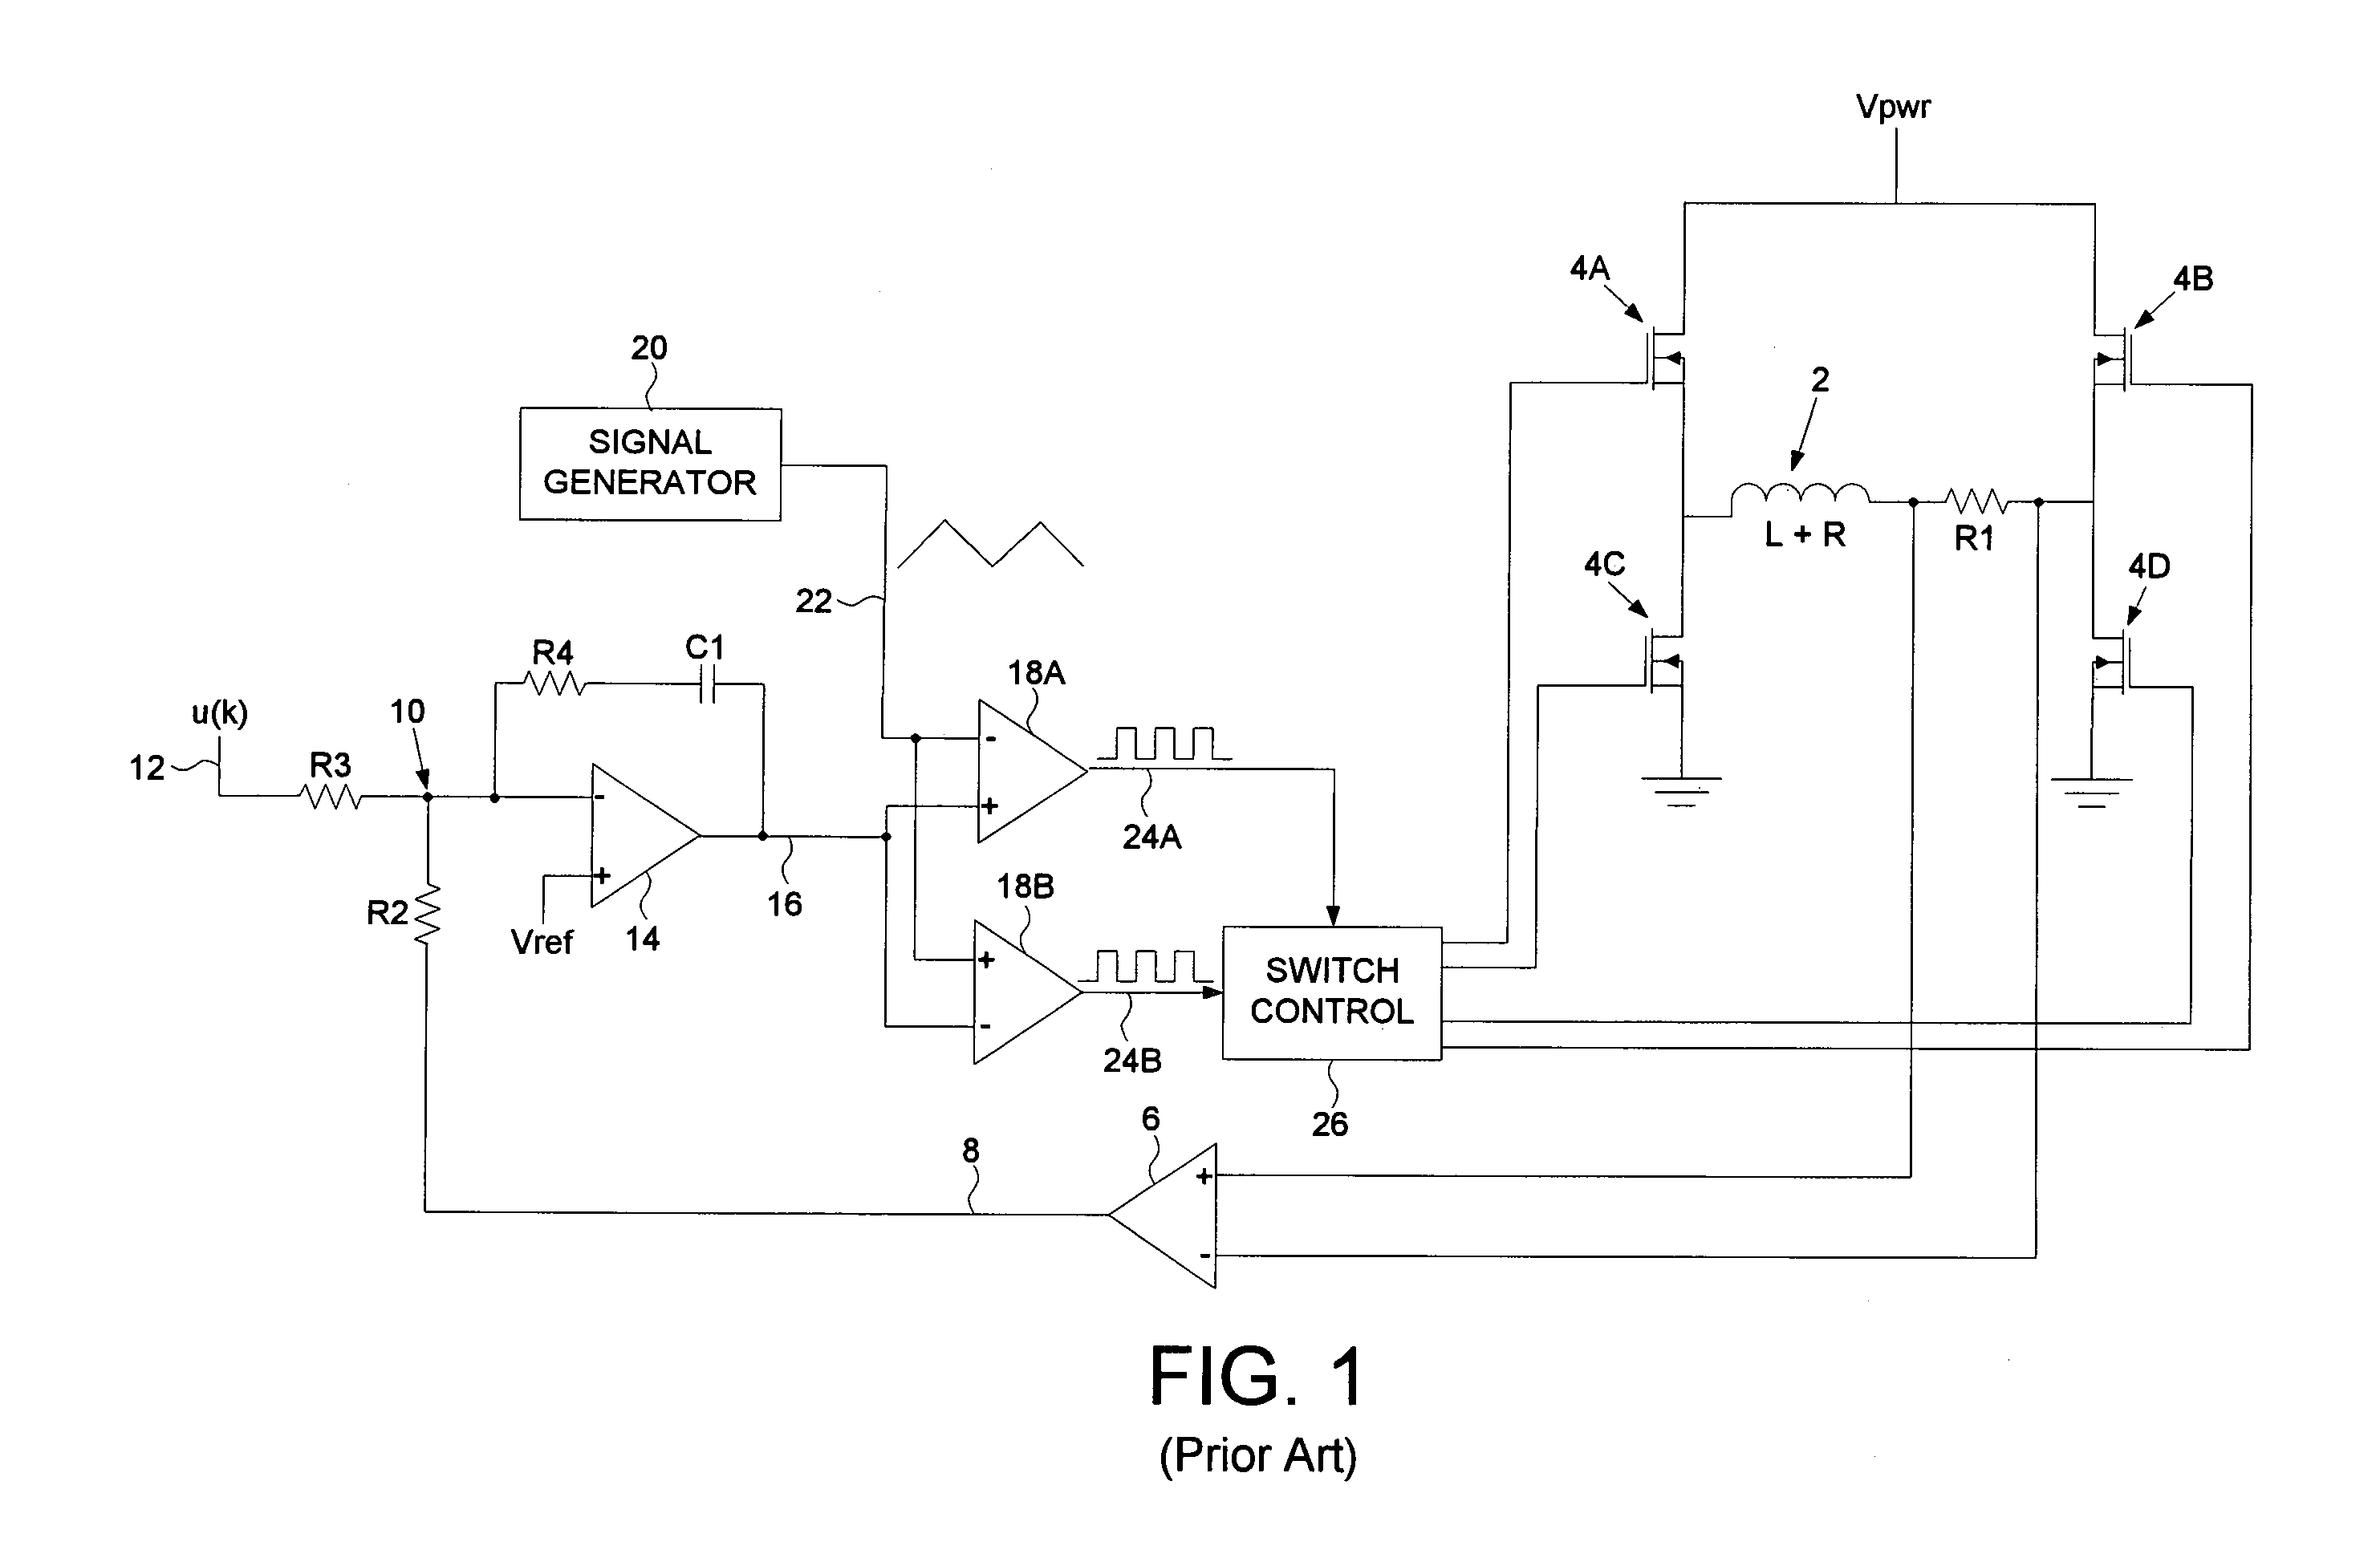 Disk drive controlling ripple current of a voice coil motor when driven by a PWM driver